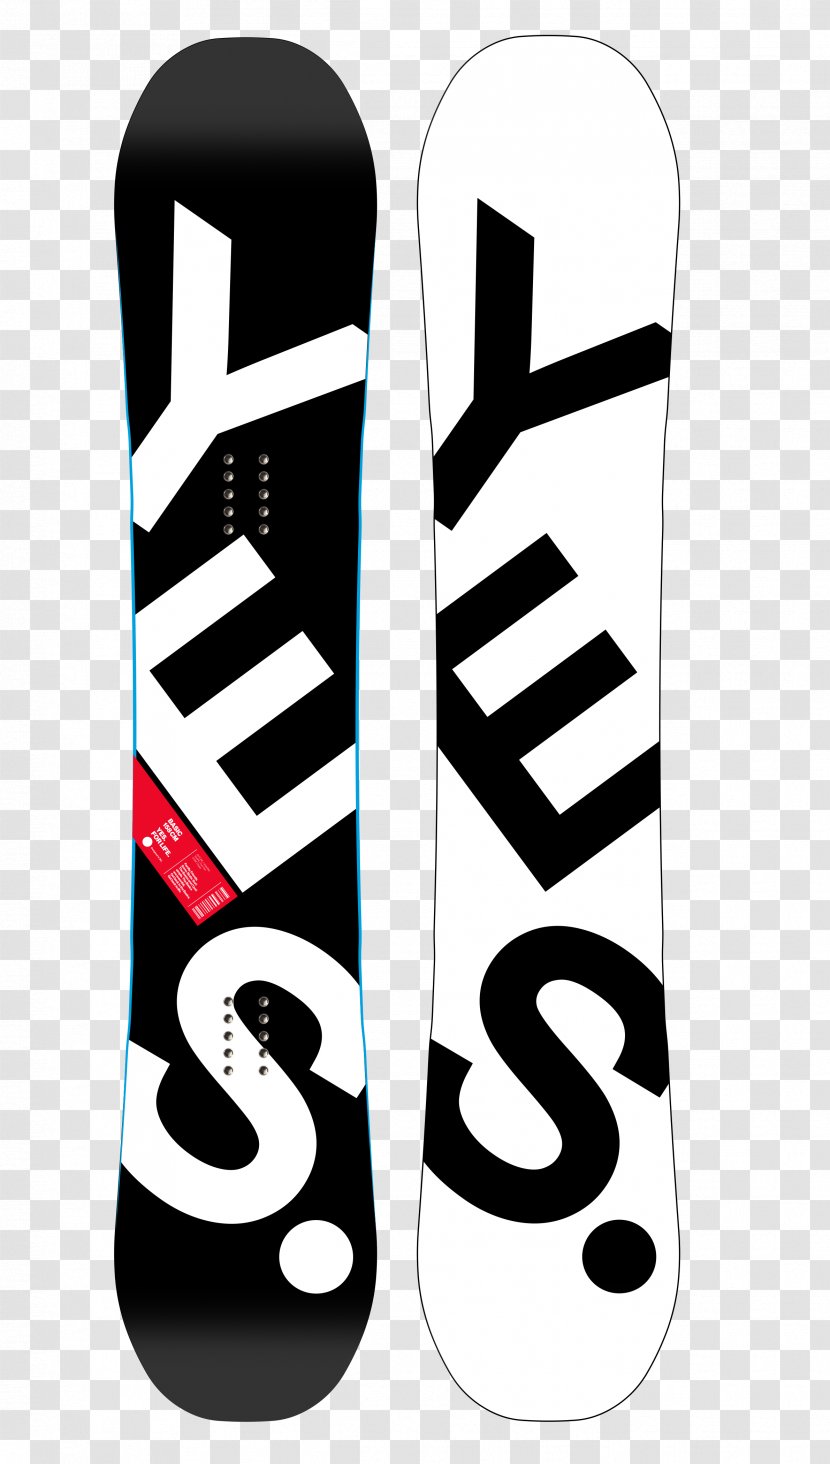 YES Snowboards Snowboarding At The 2018 Olympic Winter Games Skateboard - Big Air - Snowboard Transparent PNG